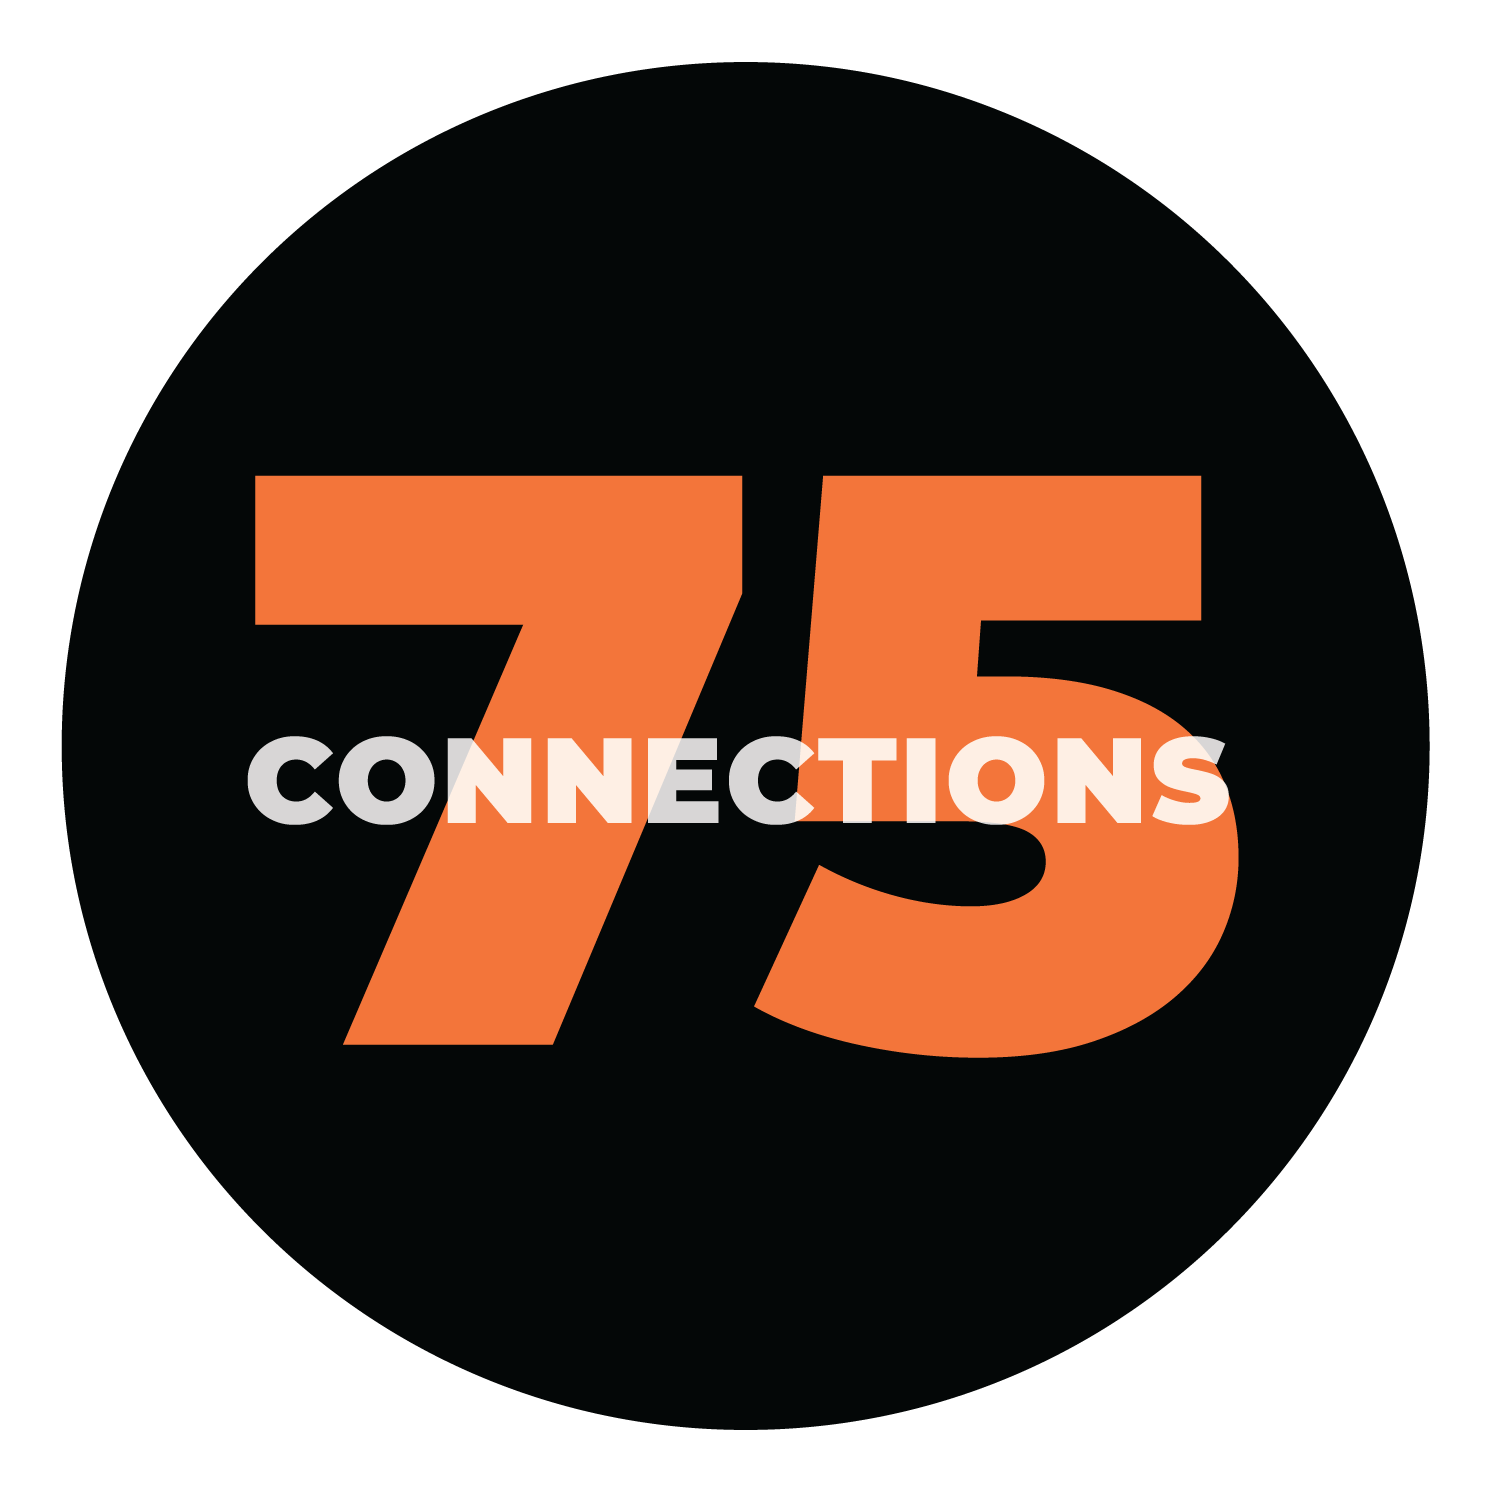 Goal: 75 connections